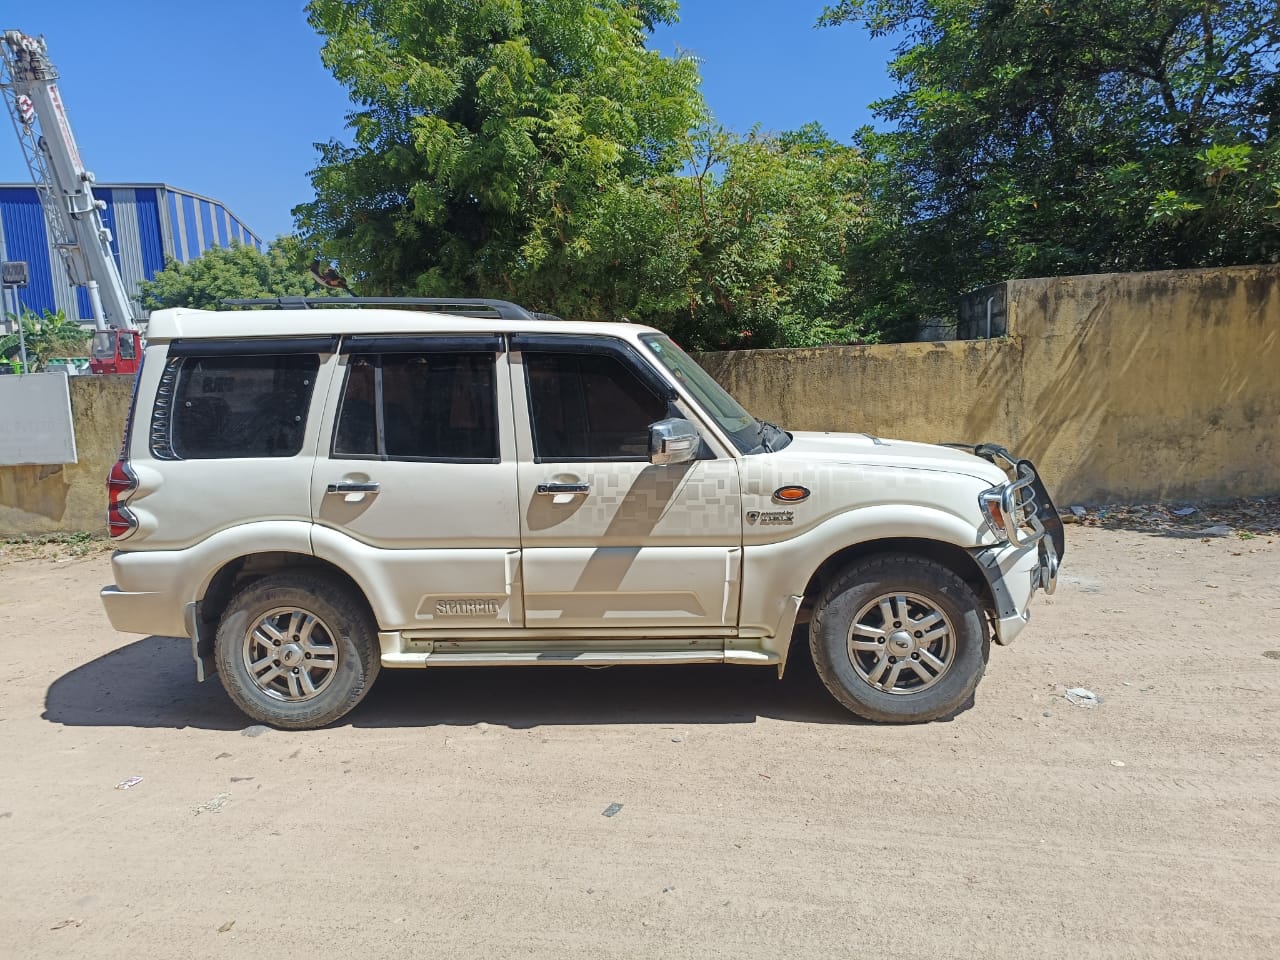 4328-for-sale-Mahindra-Scorpio-Diesel-Third-Owner-2012-TN-registered-rs-480000